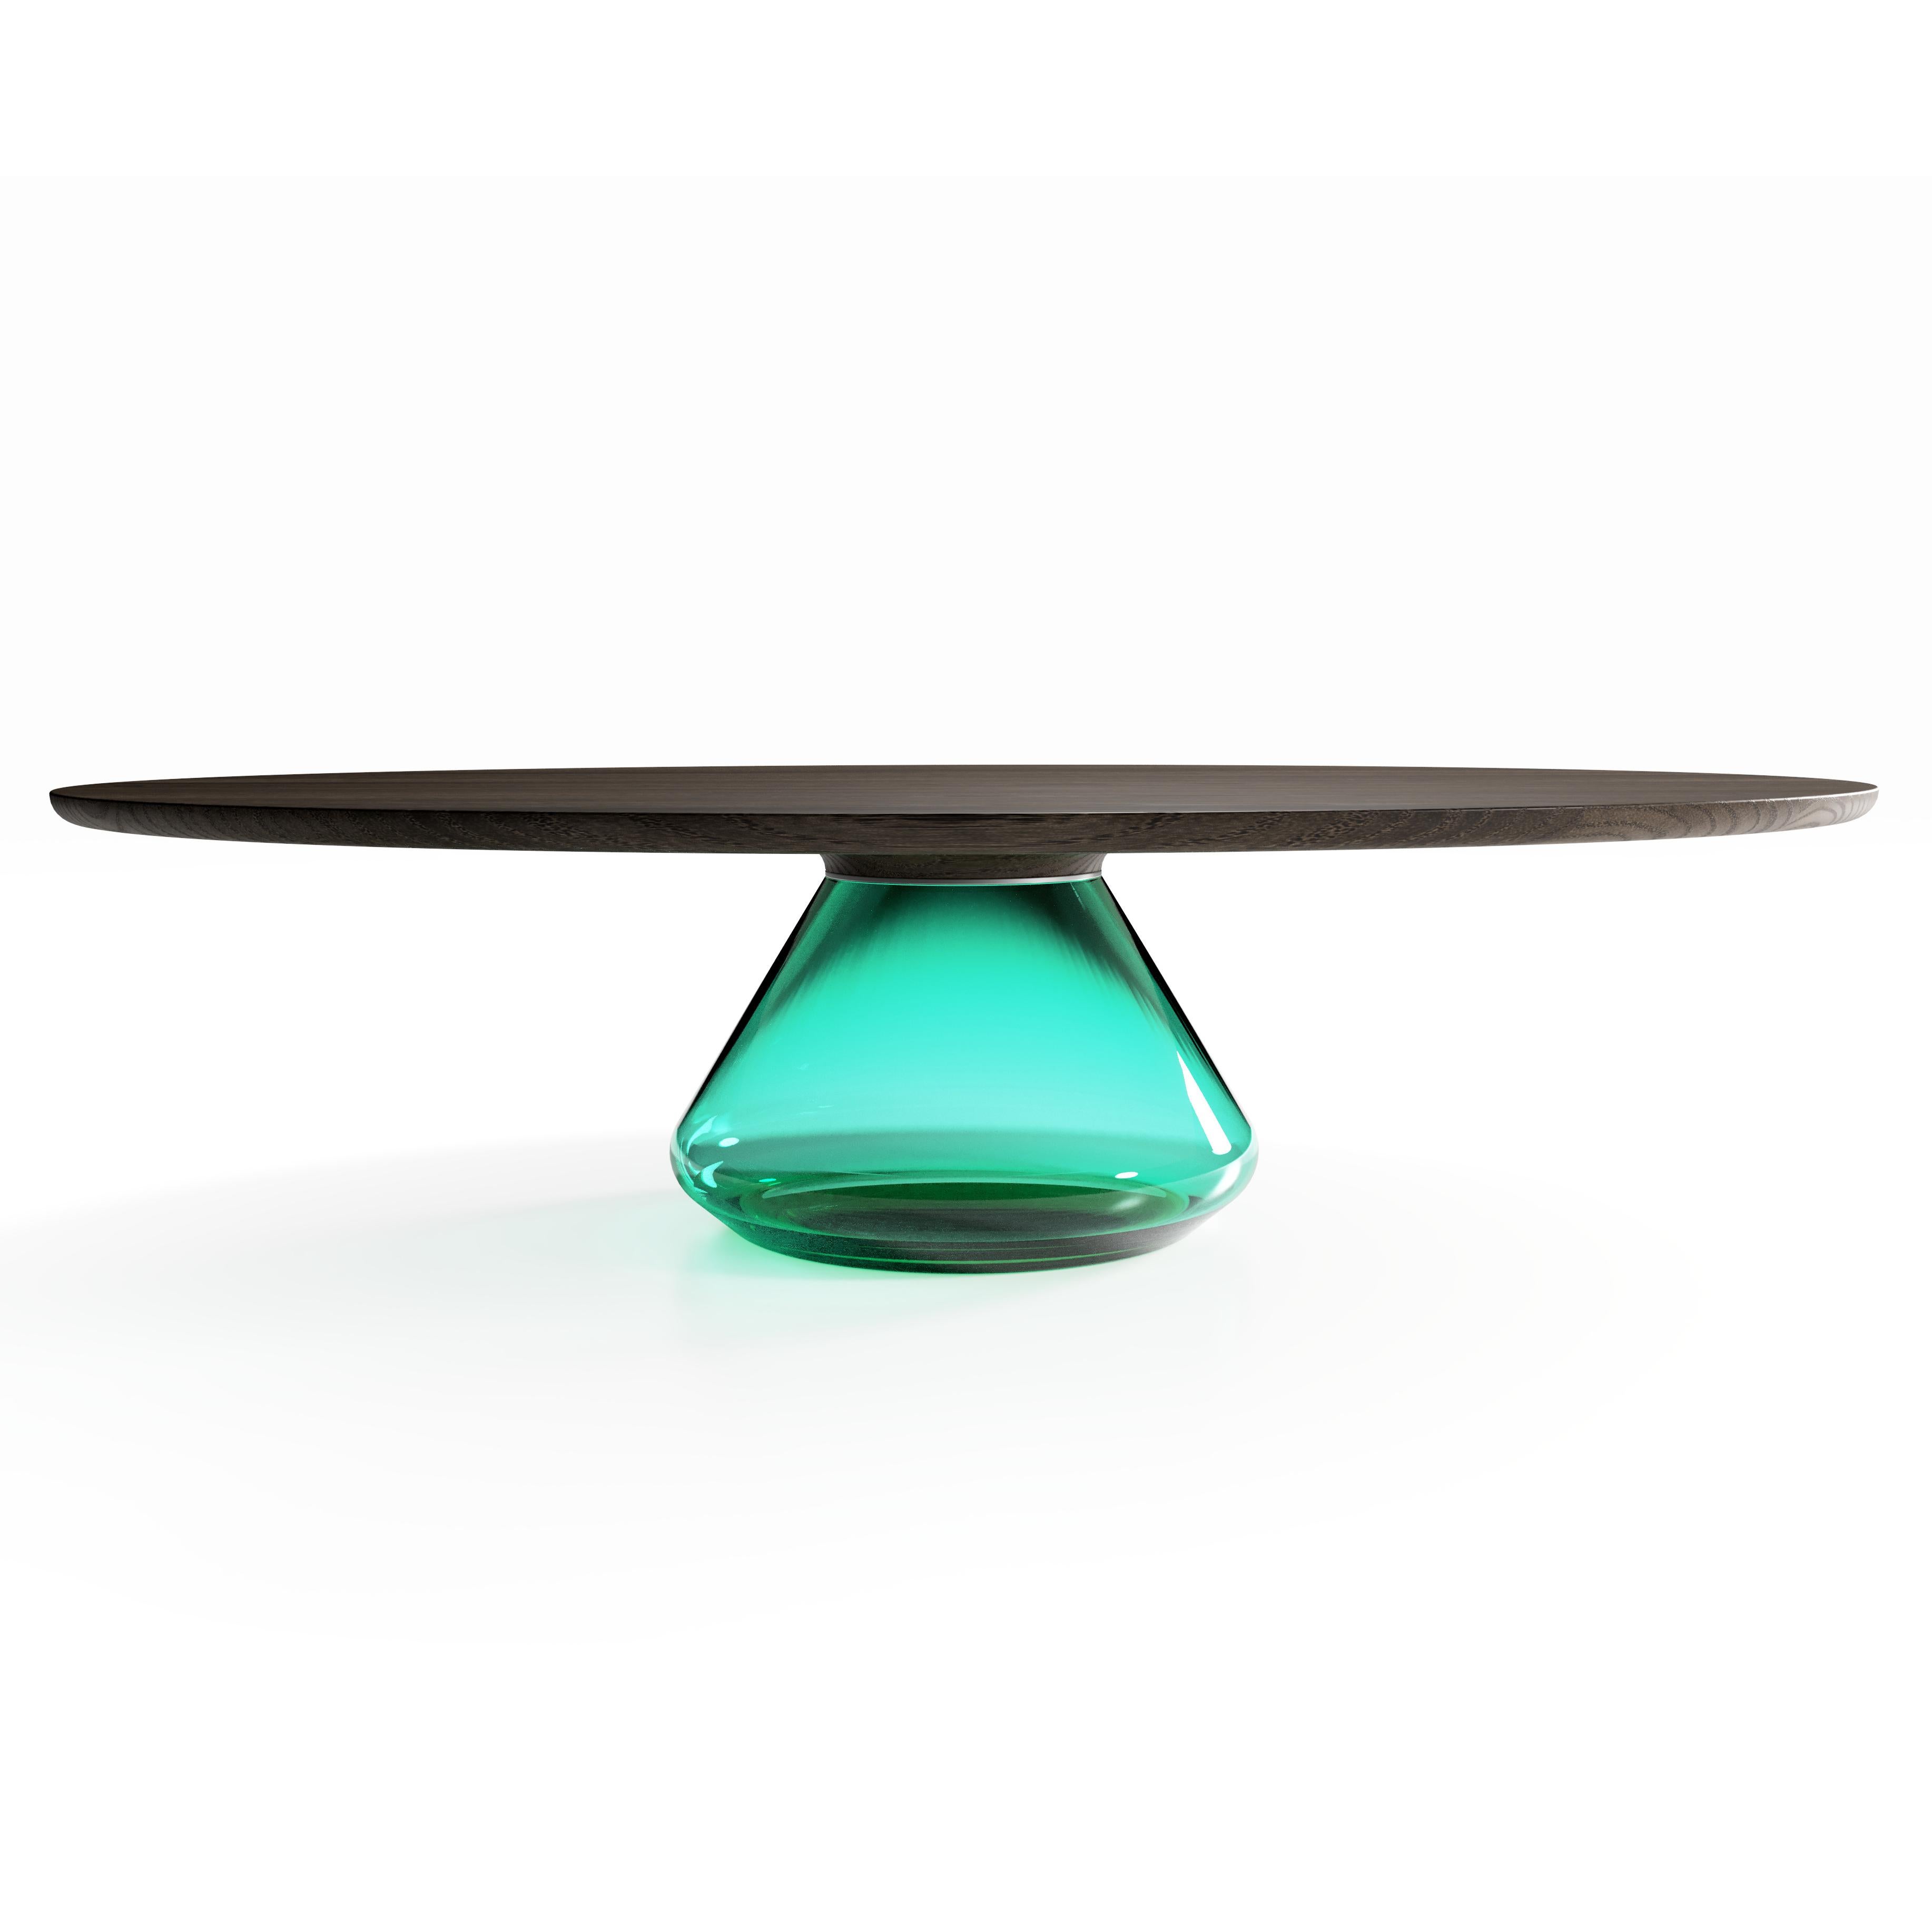 The Emerald Eclipse I, limited edition coffee table by Grzegorz Majka
Limited Edition of 8
Dimensions: 54 x 48 x 14 in
Materials: Glass, oak

The total eclipse of every interior? With this amazing table everything is possible as with its